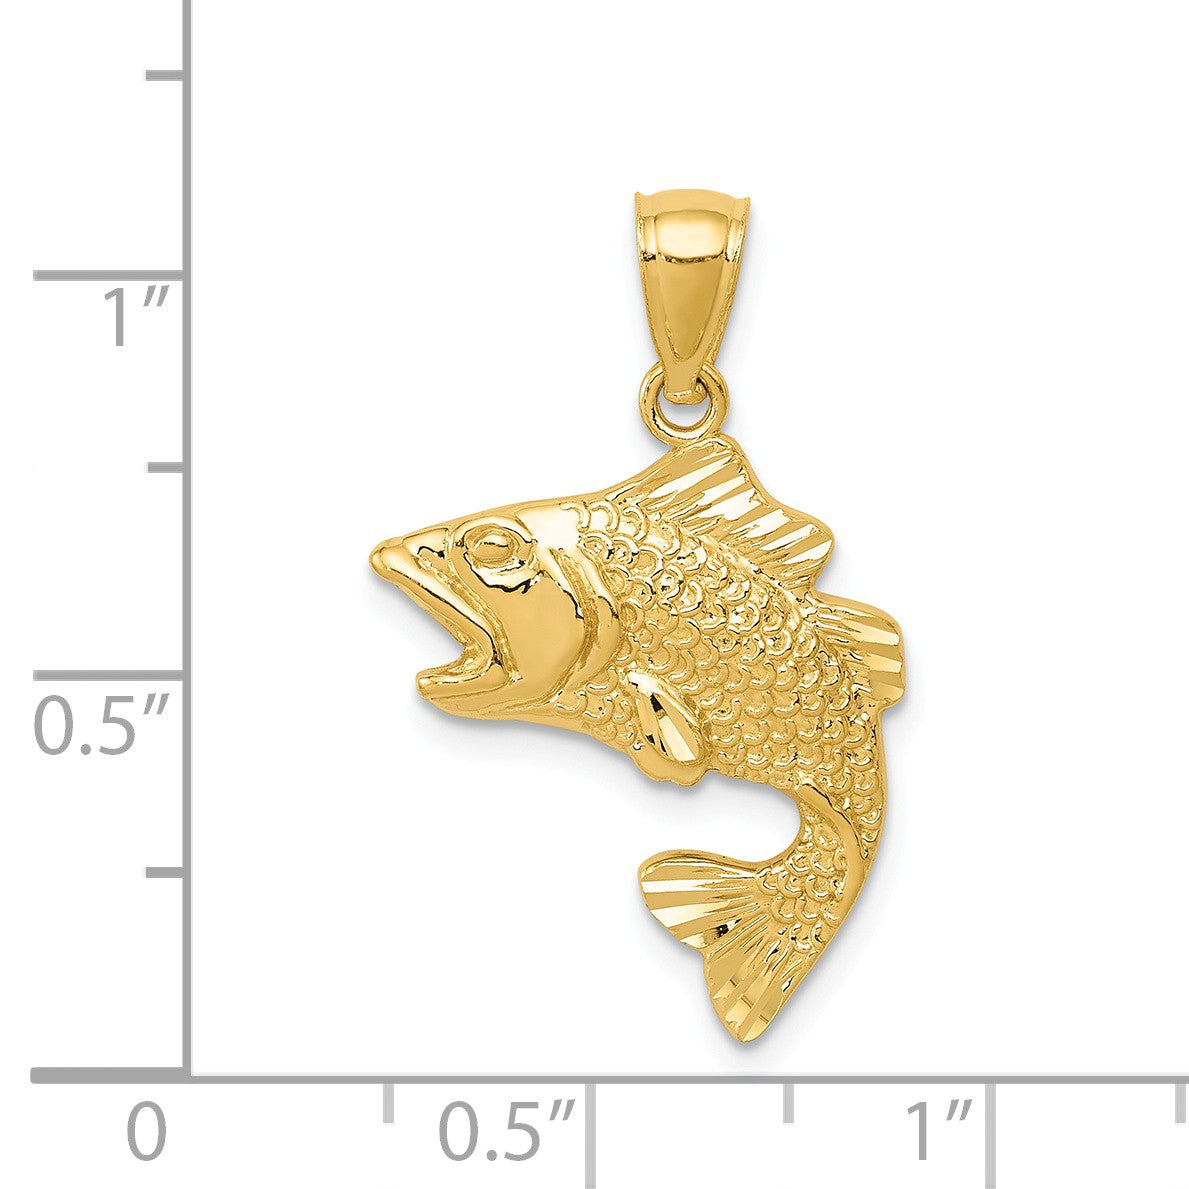 Alternate view of the 14k Yellow Gold Bass Pendant, 17mm (5/8 inch) by The Black Bow Jewelry Co.